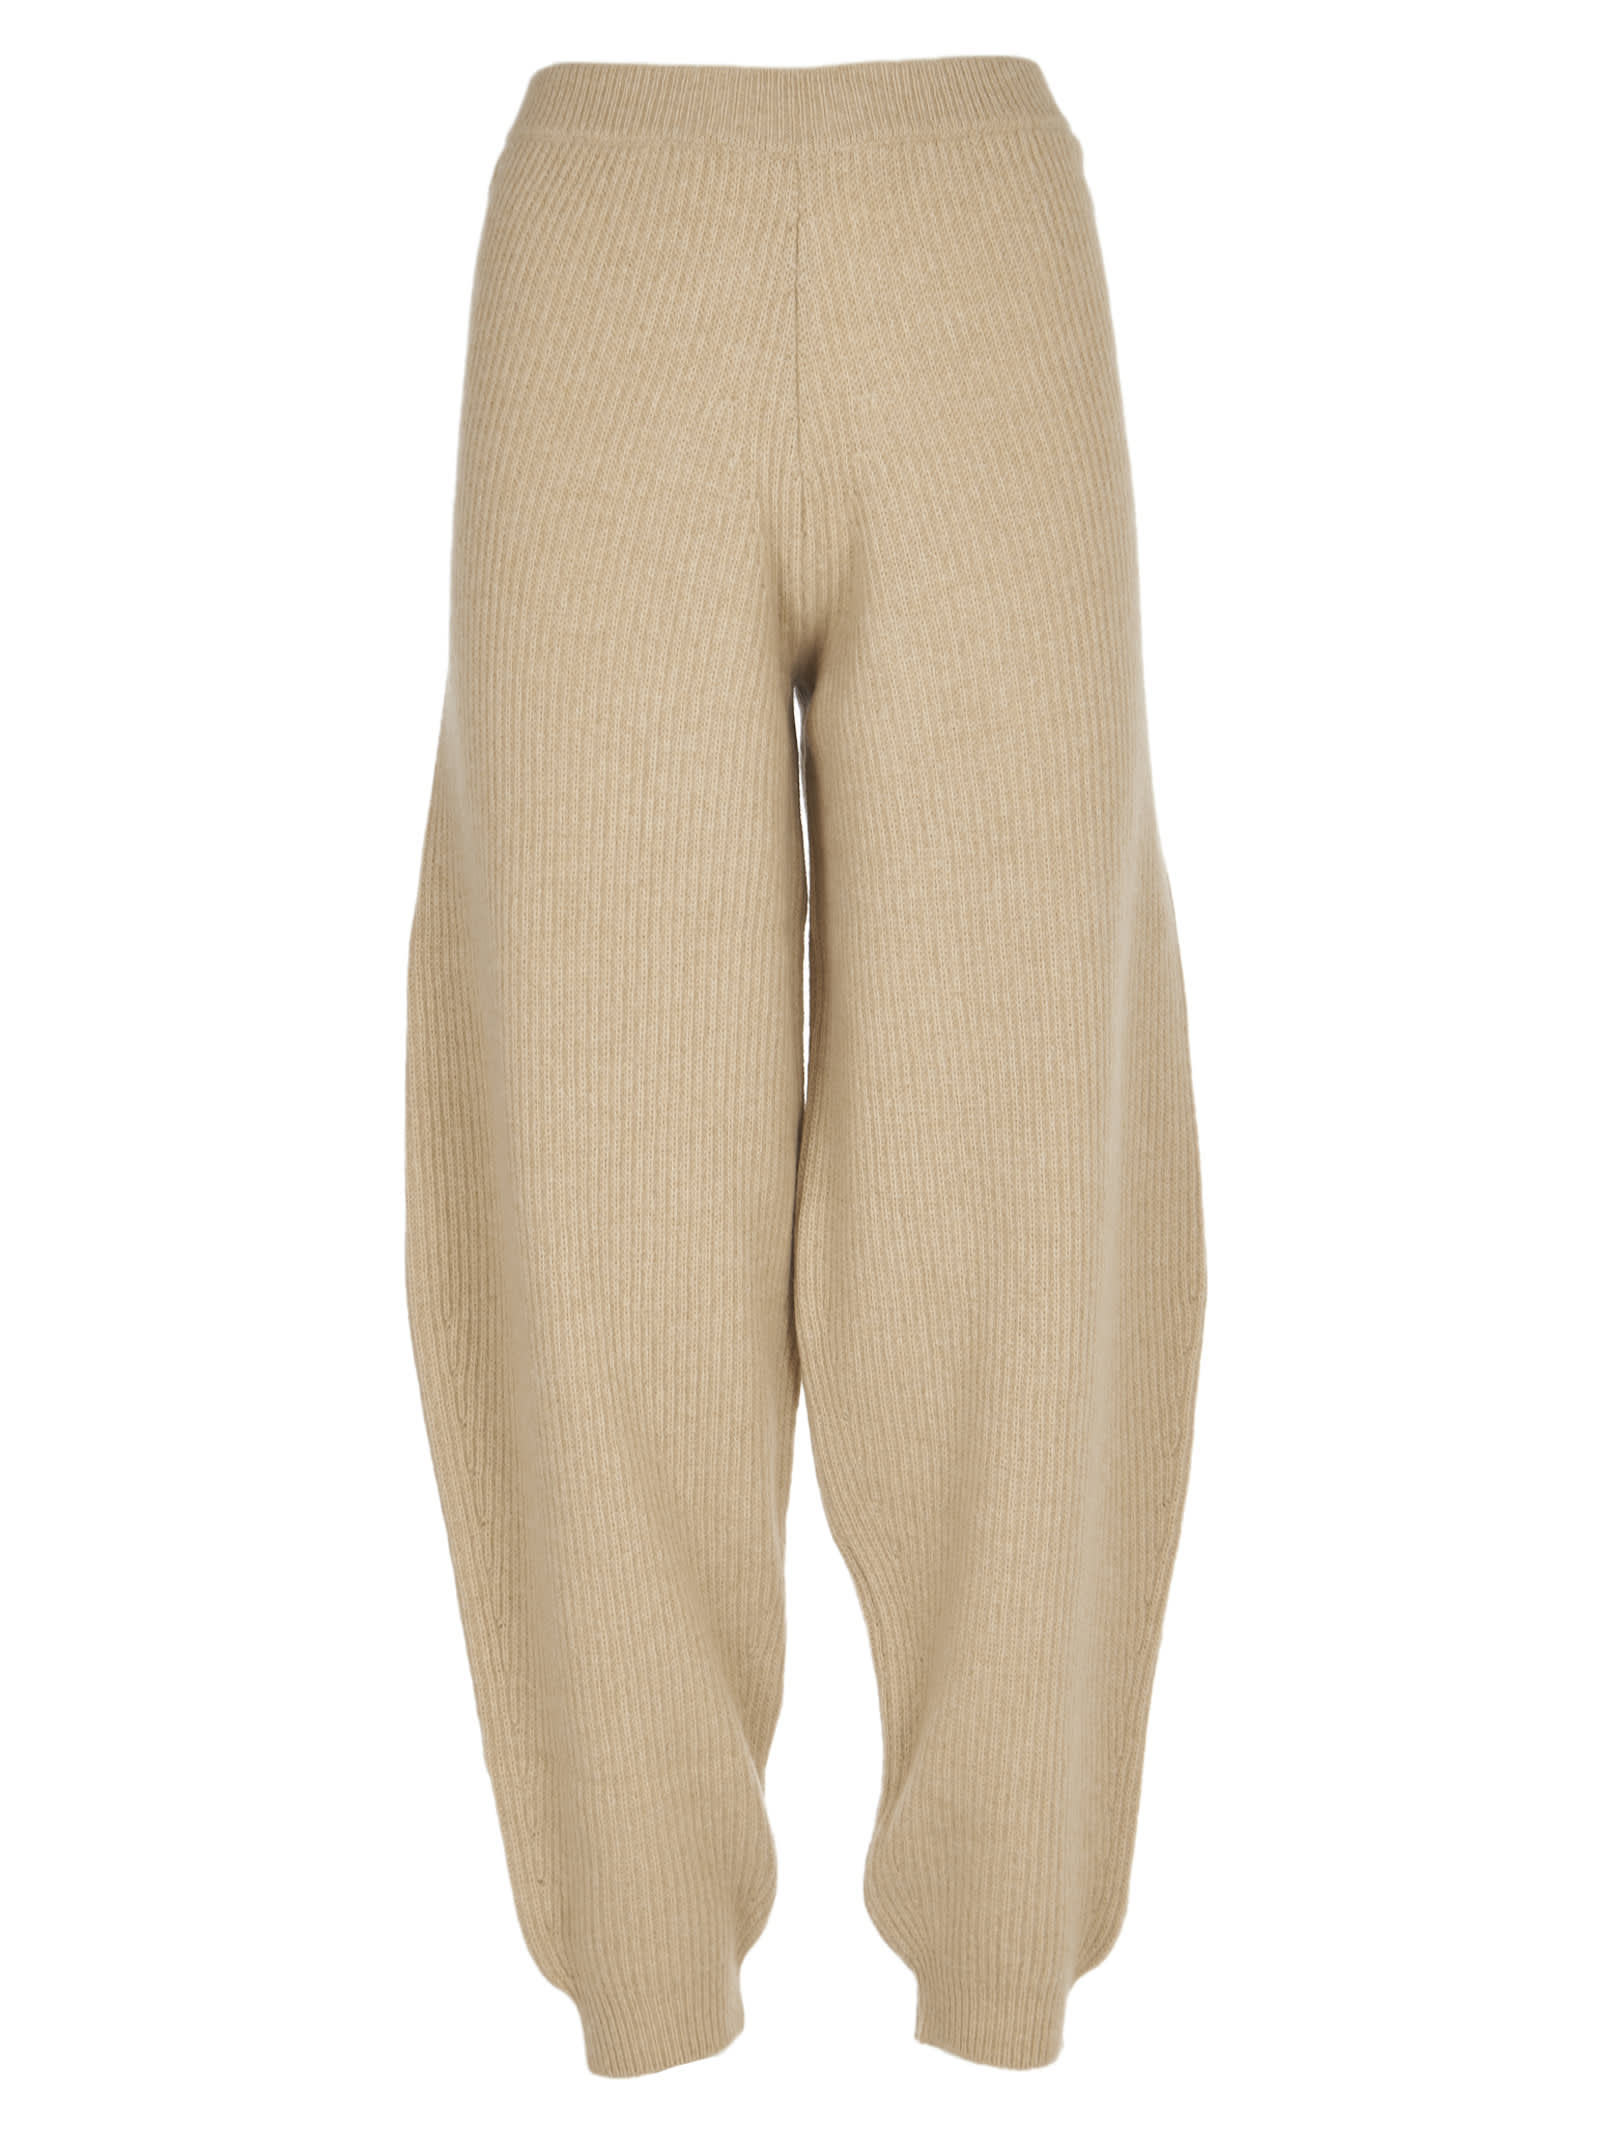 SEMICOUTURE Beige Wool Knitted Trousers